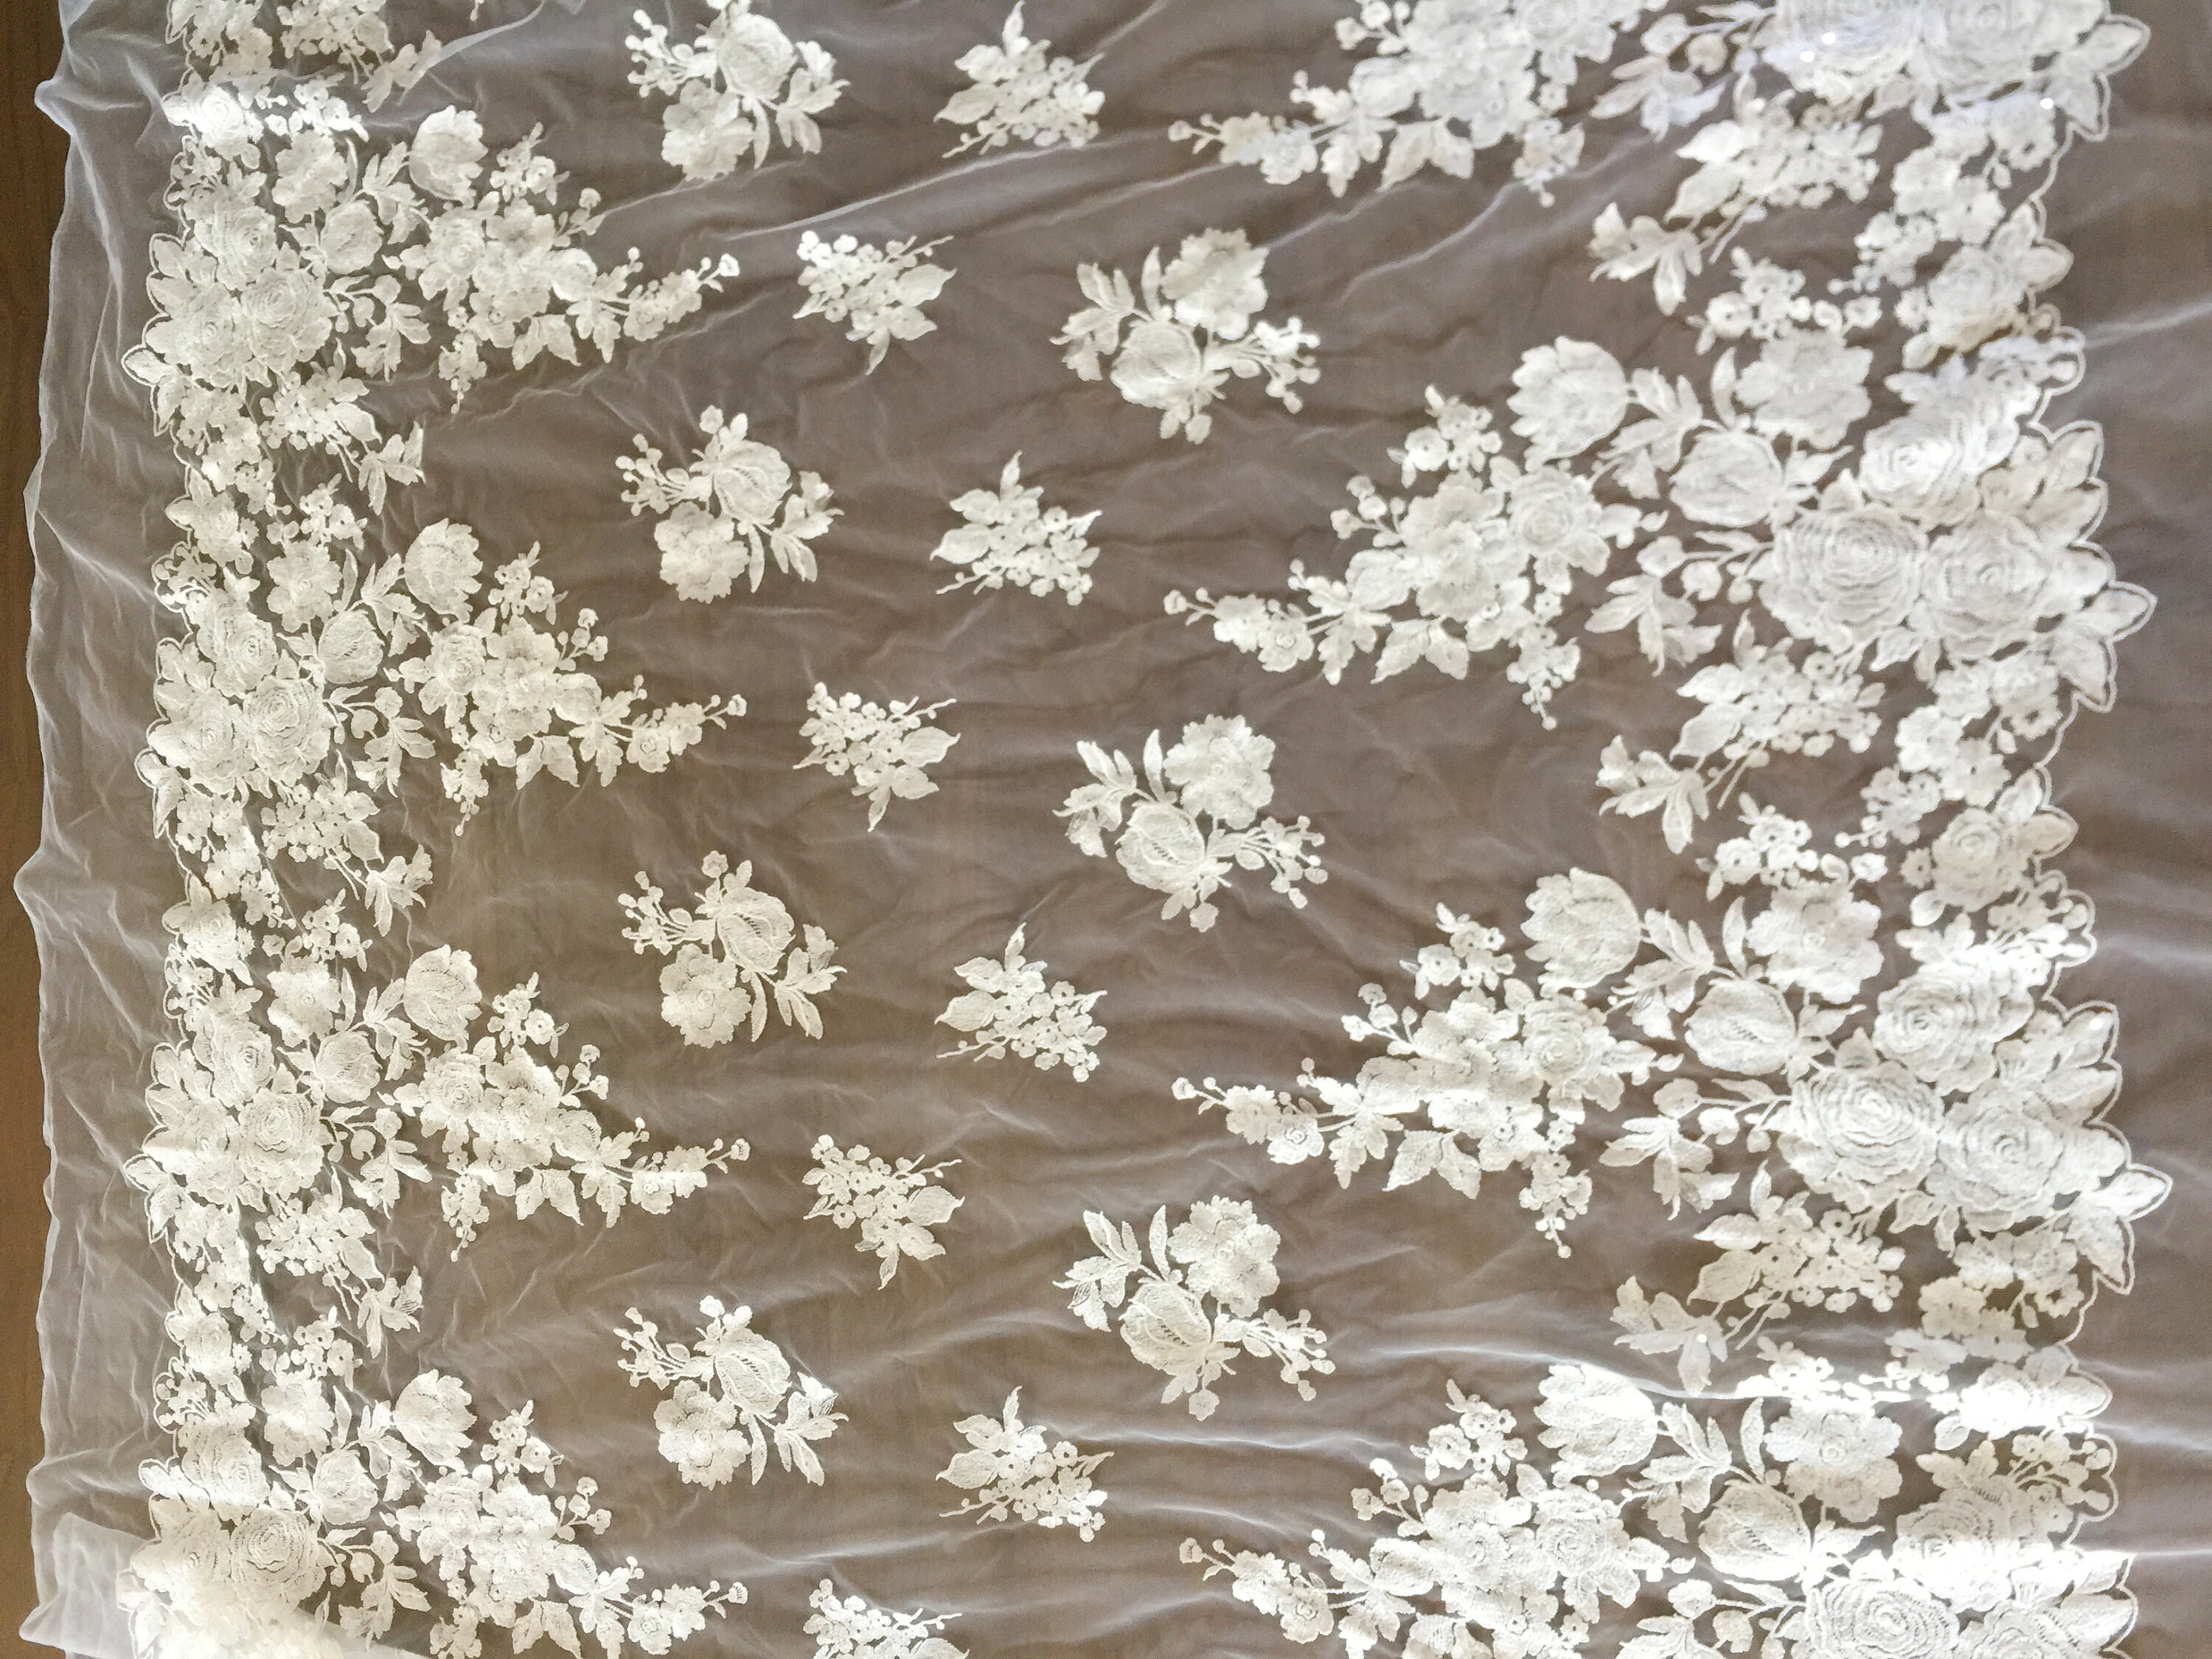 Exquisite Large Flower Rose Clear Sequin Fabric by Yard | Etsy